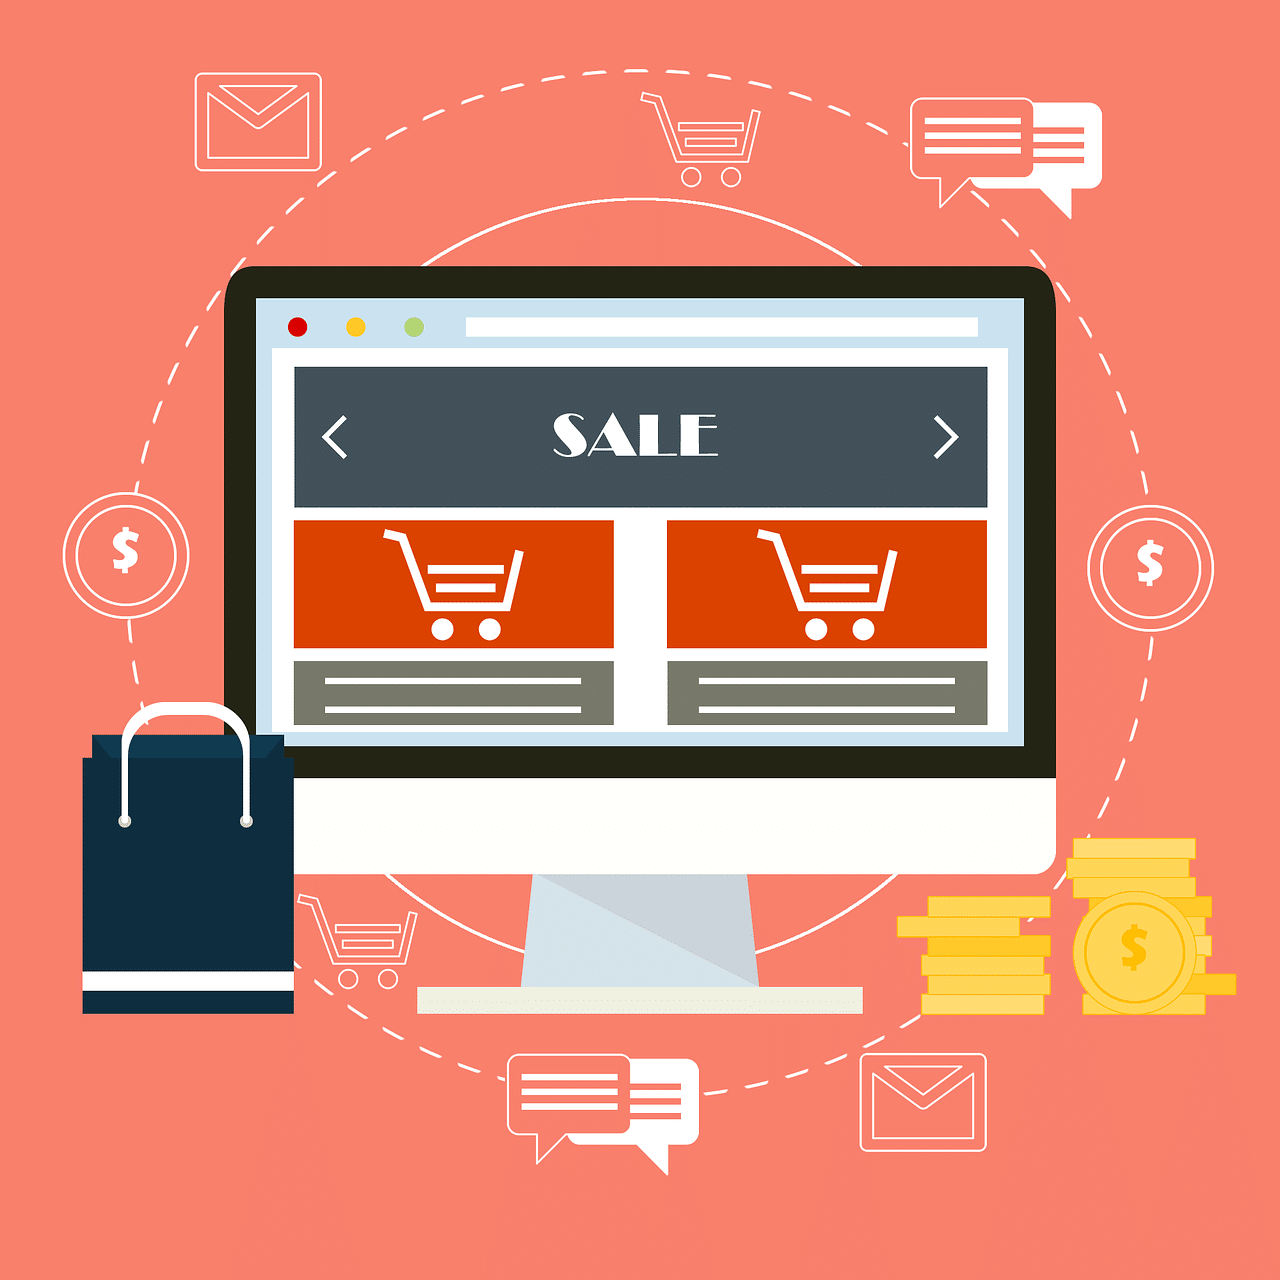 Selling Items Online: A Quick Way to Make Money